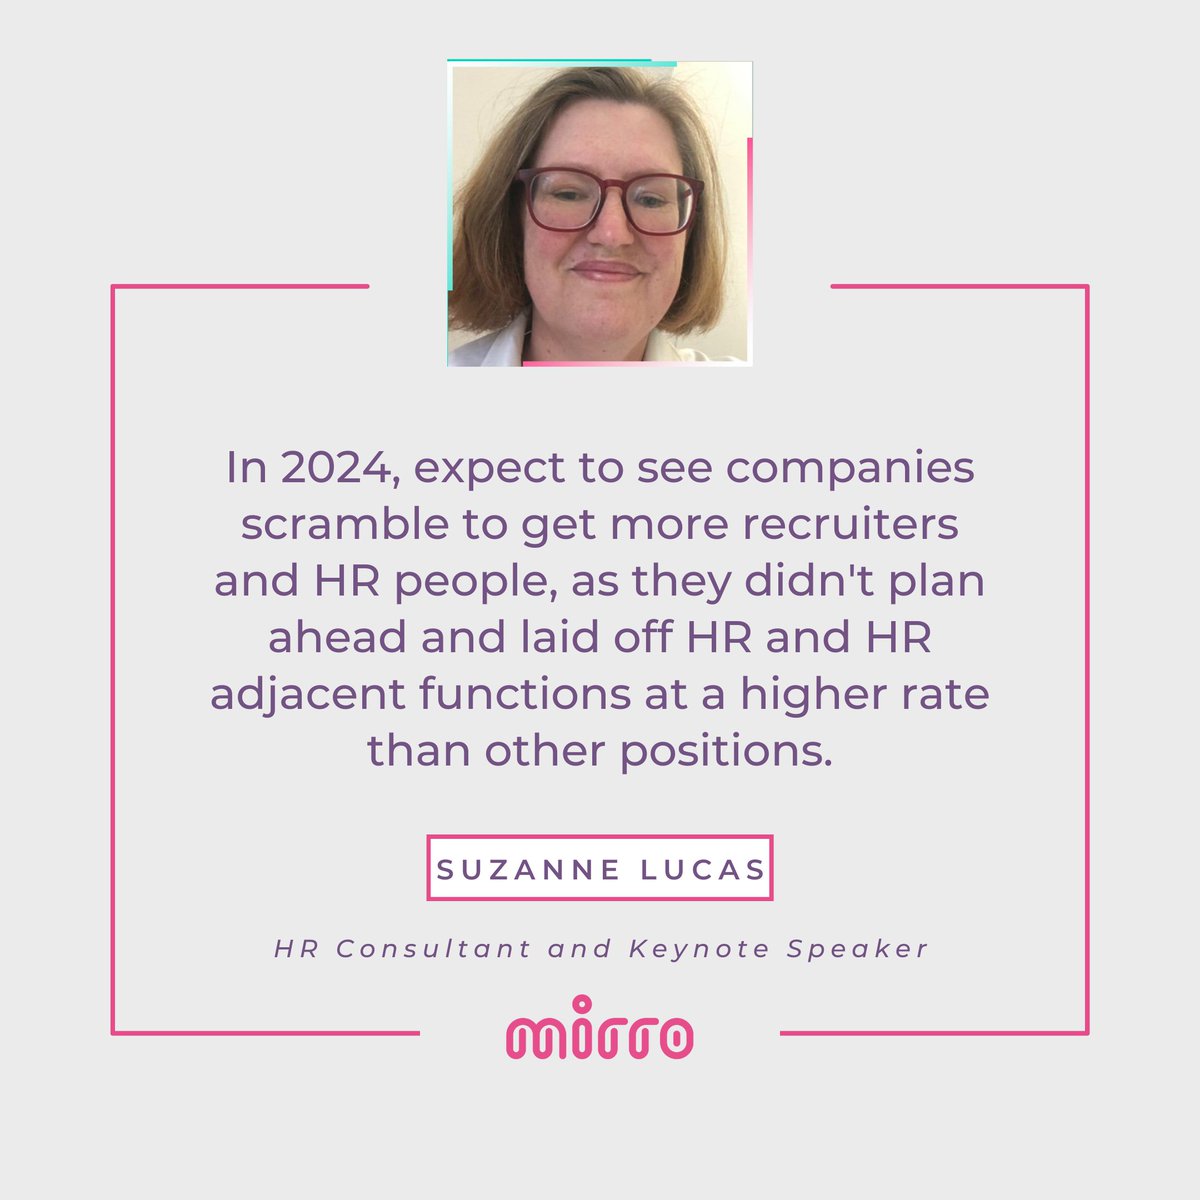 It's time for our “what’s in store for HR in 2024” roundup! 🔮✨
What are your predictions for HR in 2024? Share your thoughts in the comments! 🤩 #HRtrends #HRcommunity
w/ @RealEvilHRLady